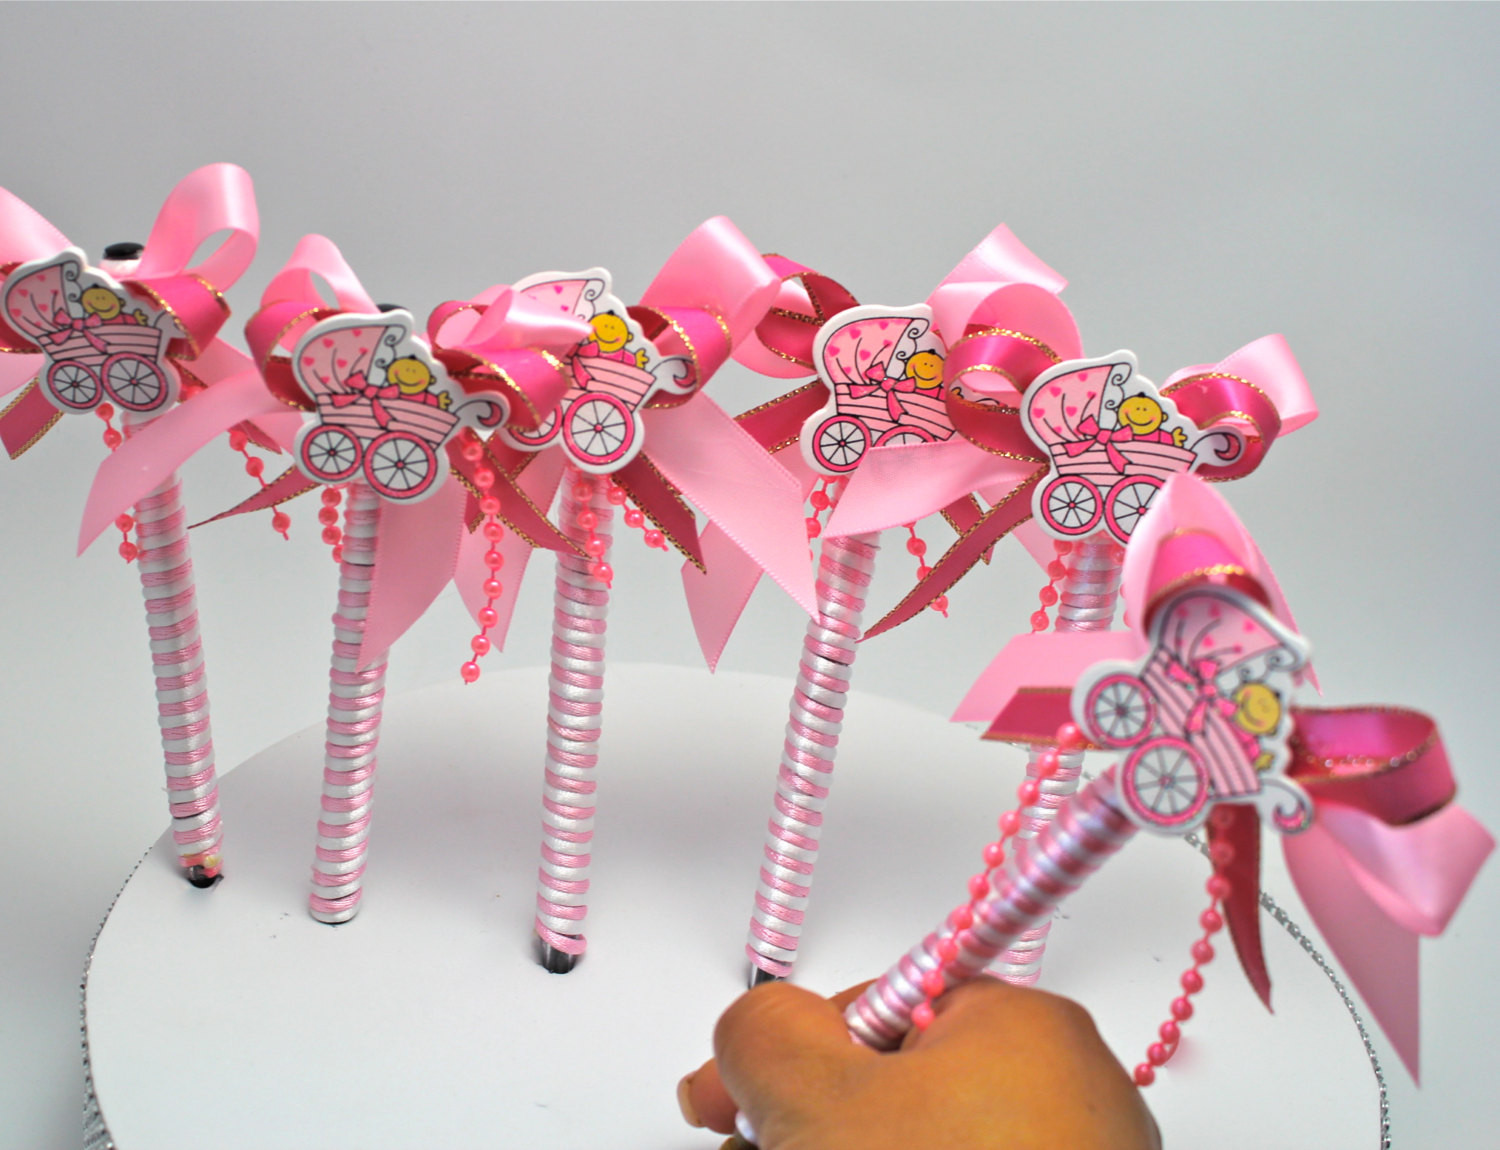 Party Favors For Baby Shower Guests
 Pink Baby Shower Pen Favor Party Favors by FavorsBoutique